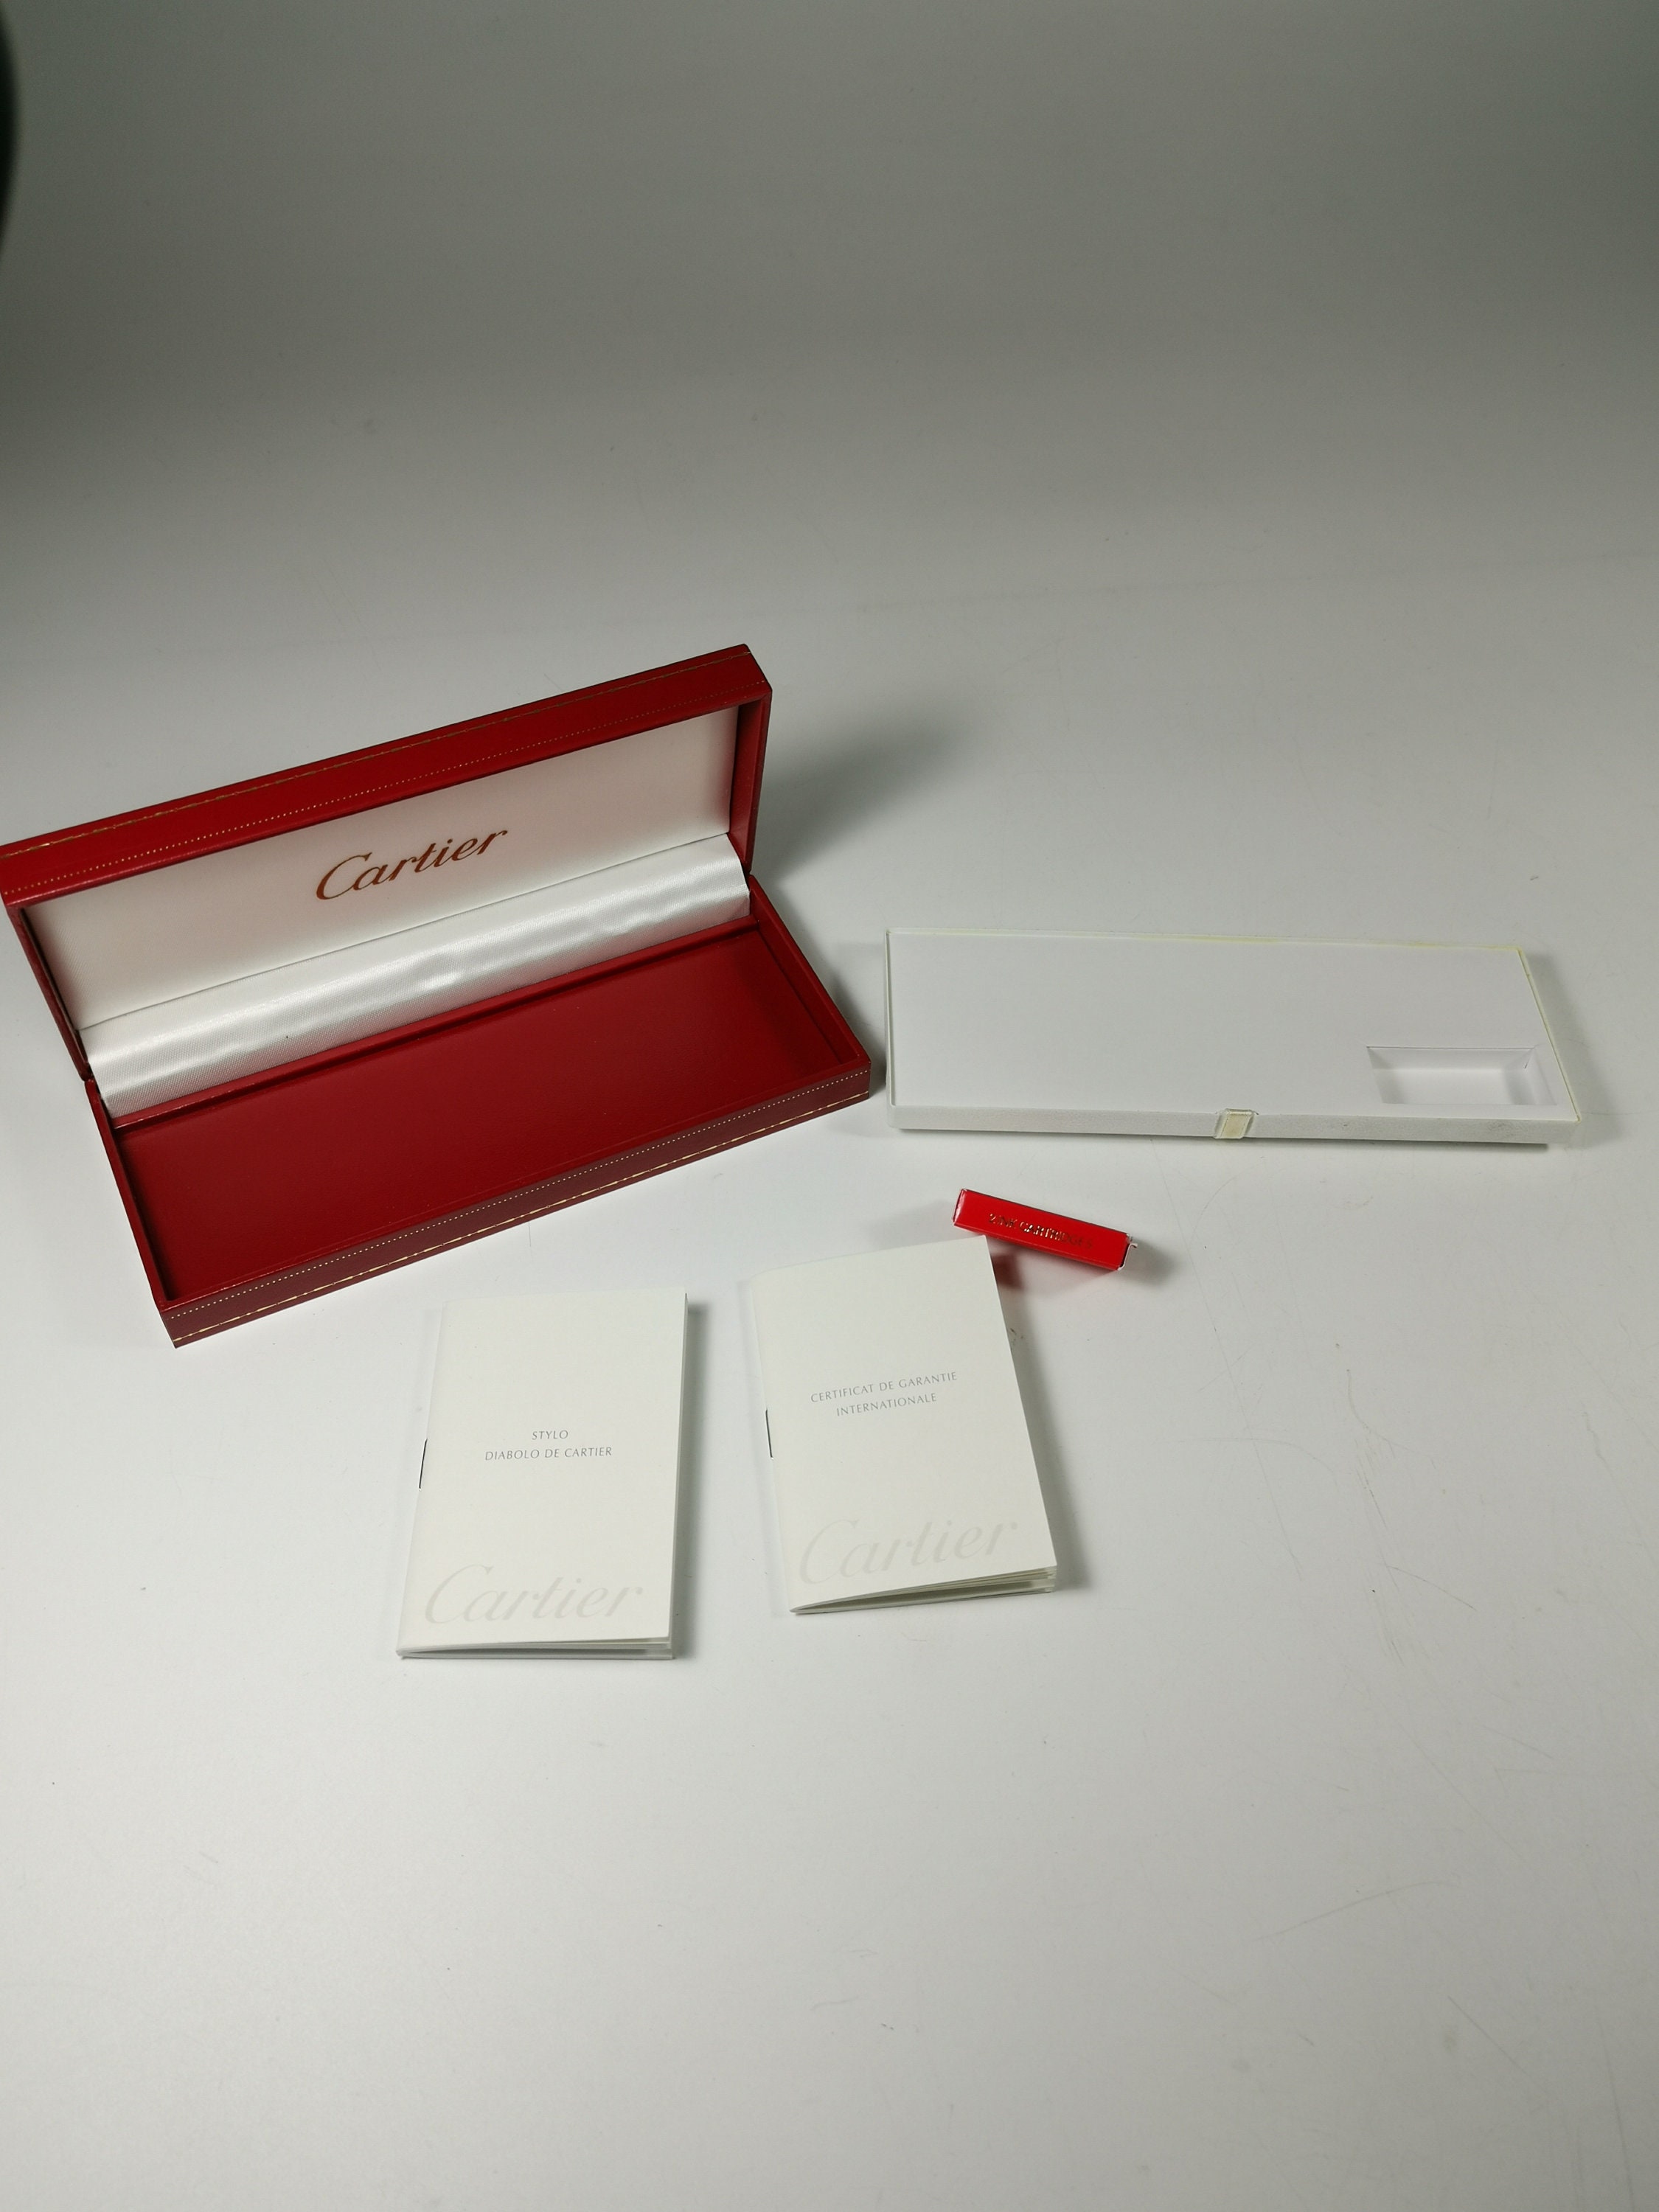 Cartier, Wall Decor, Stunning Cartier Red Envelope Never Used Not  Damageddimensions 7 X 35